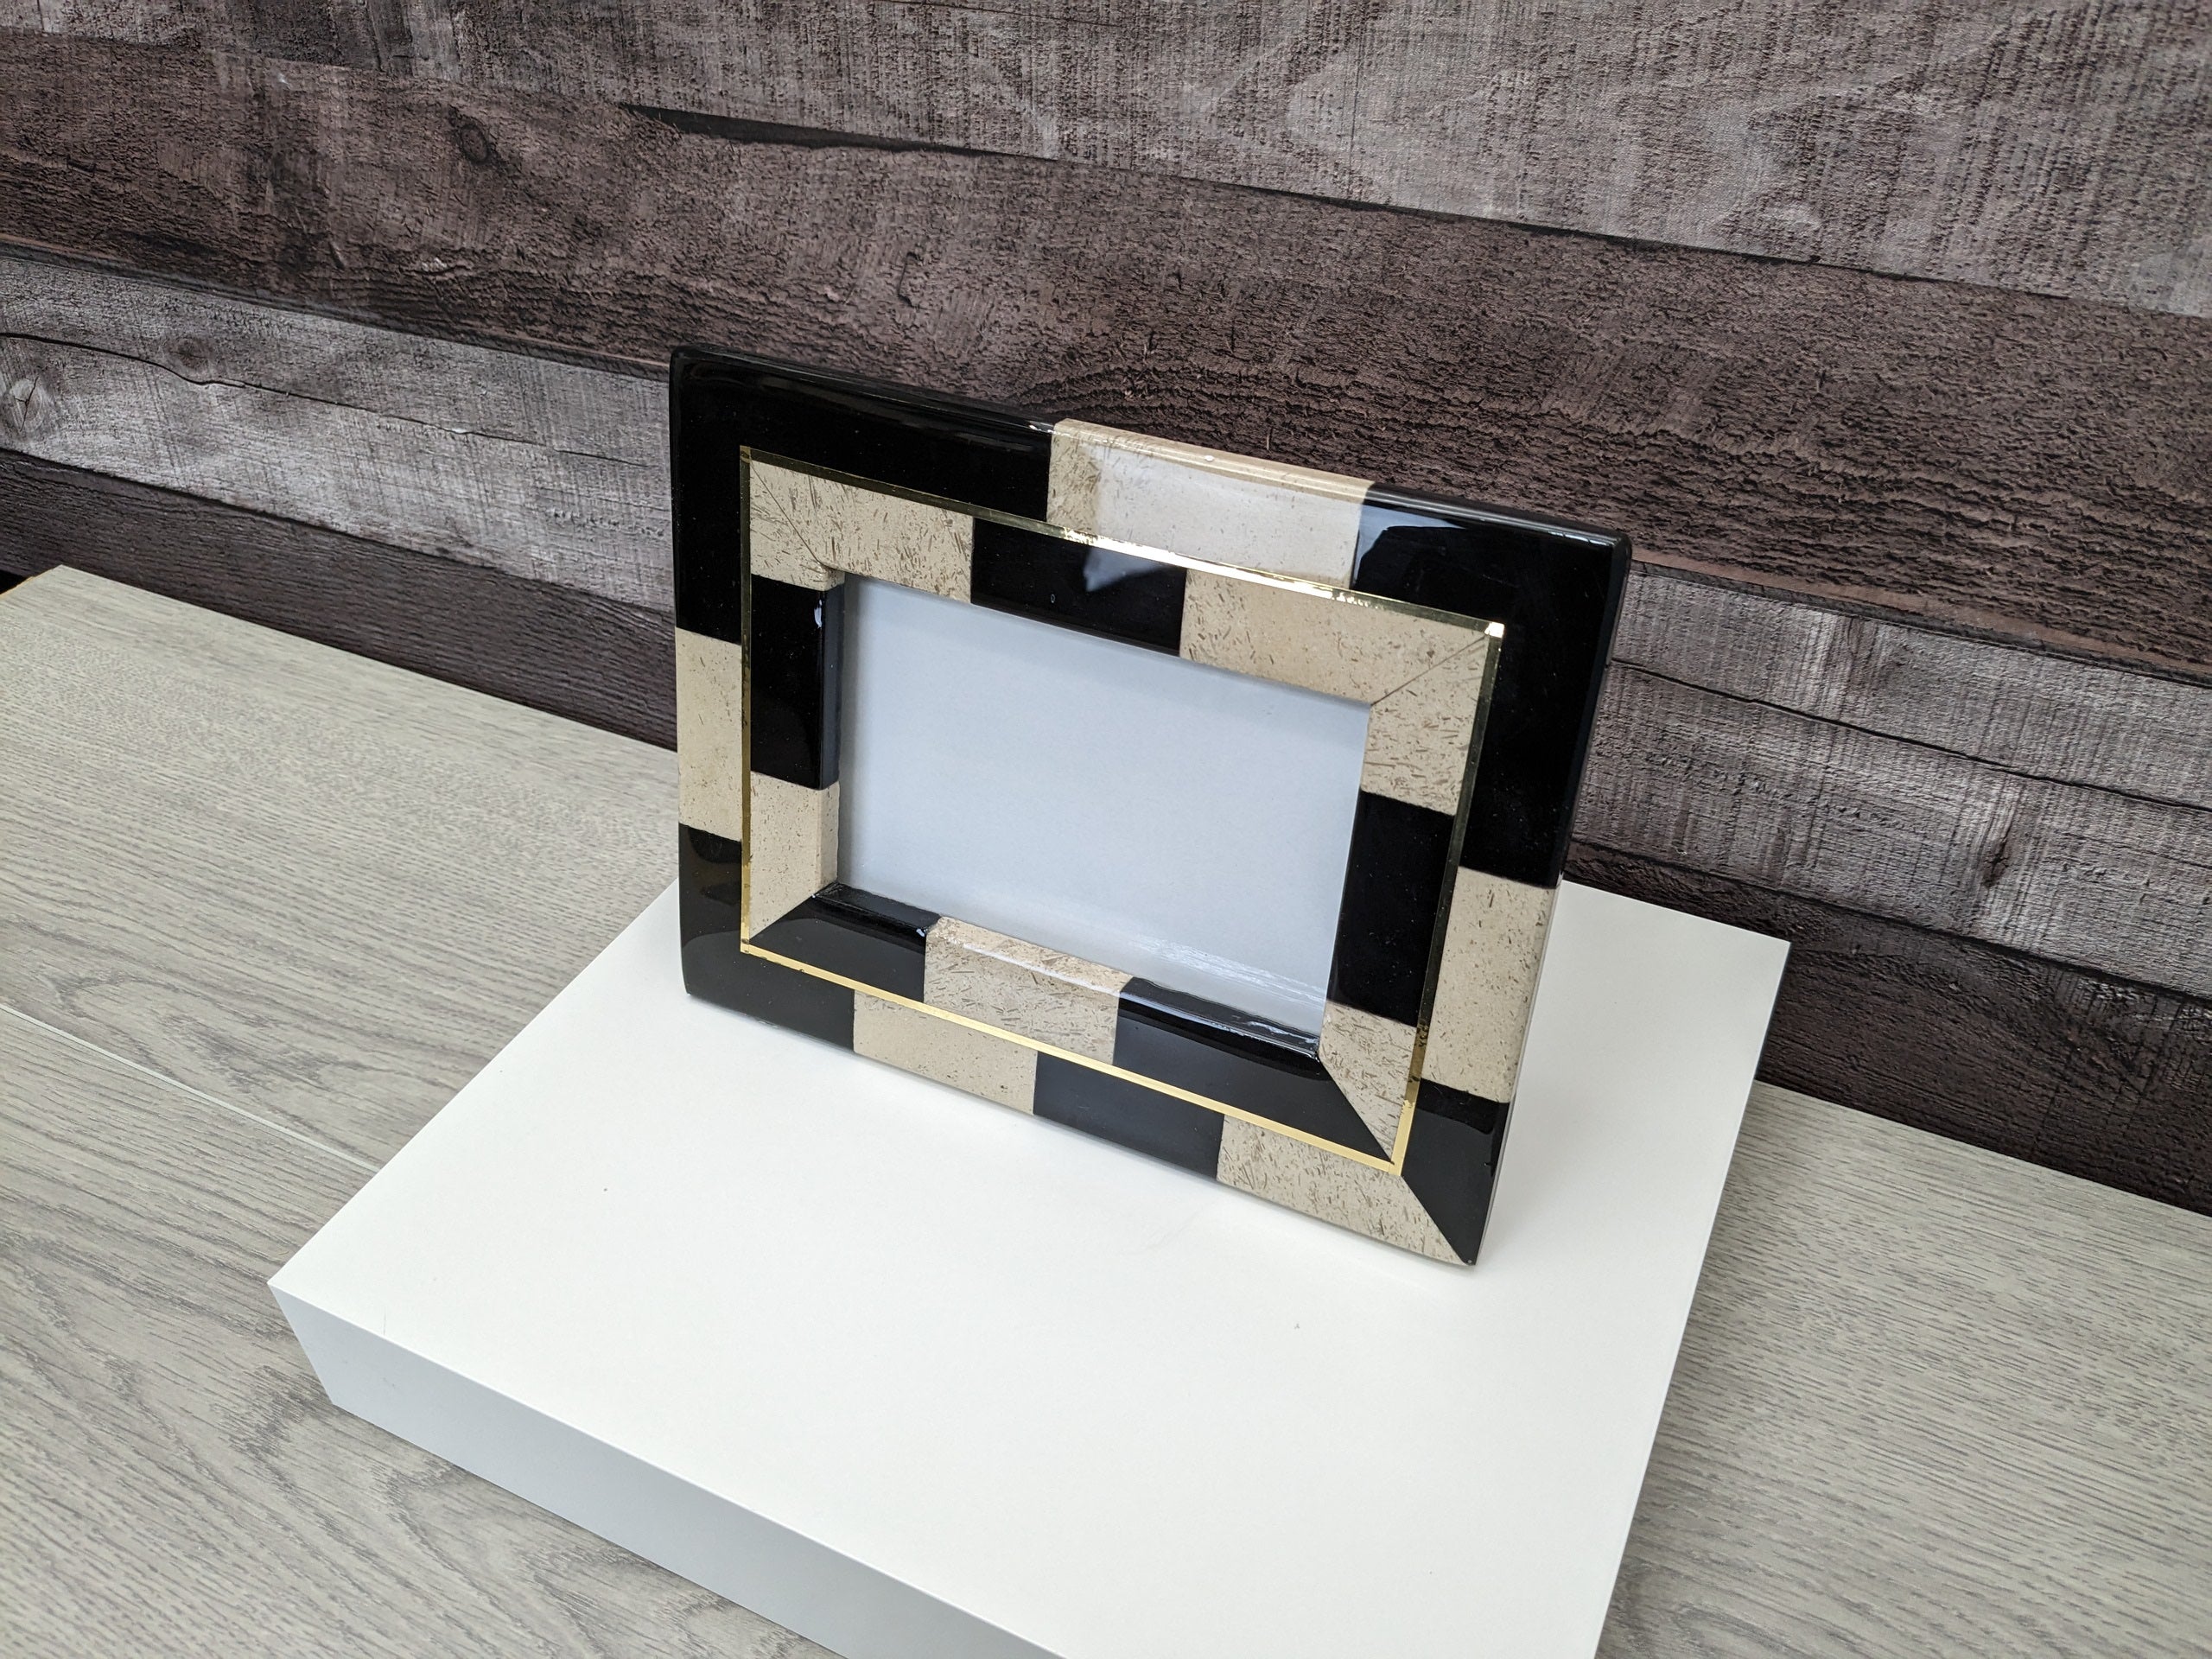 Black and Tan Check Pattern Onyx Frame with Gold Thin Line and Glass Covering. Travertine Stone Stand. Handmade in Mexico. We package and ship from the USA. Buy now at www.felipeandgrace.com.